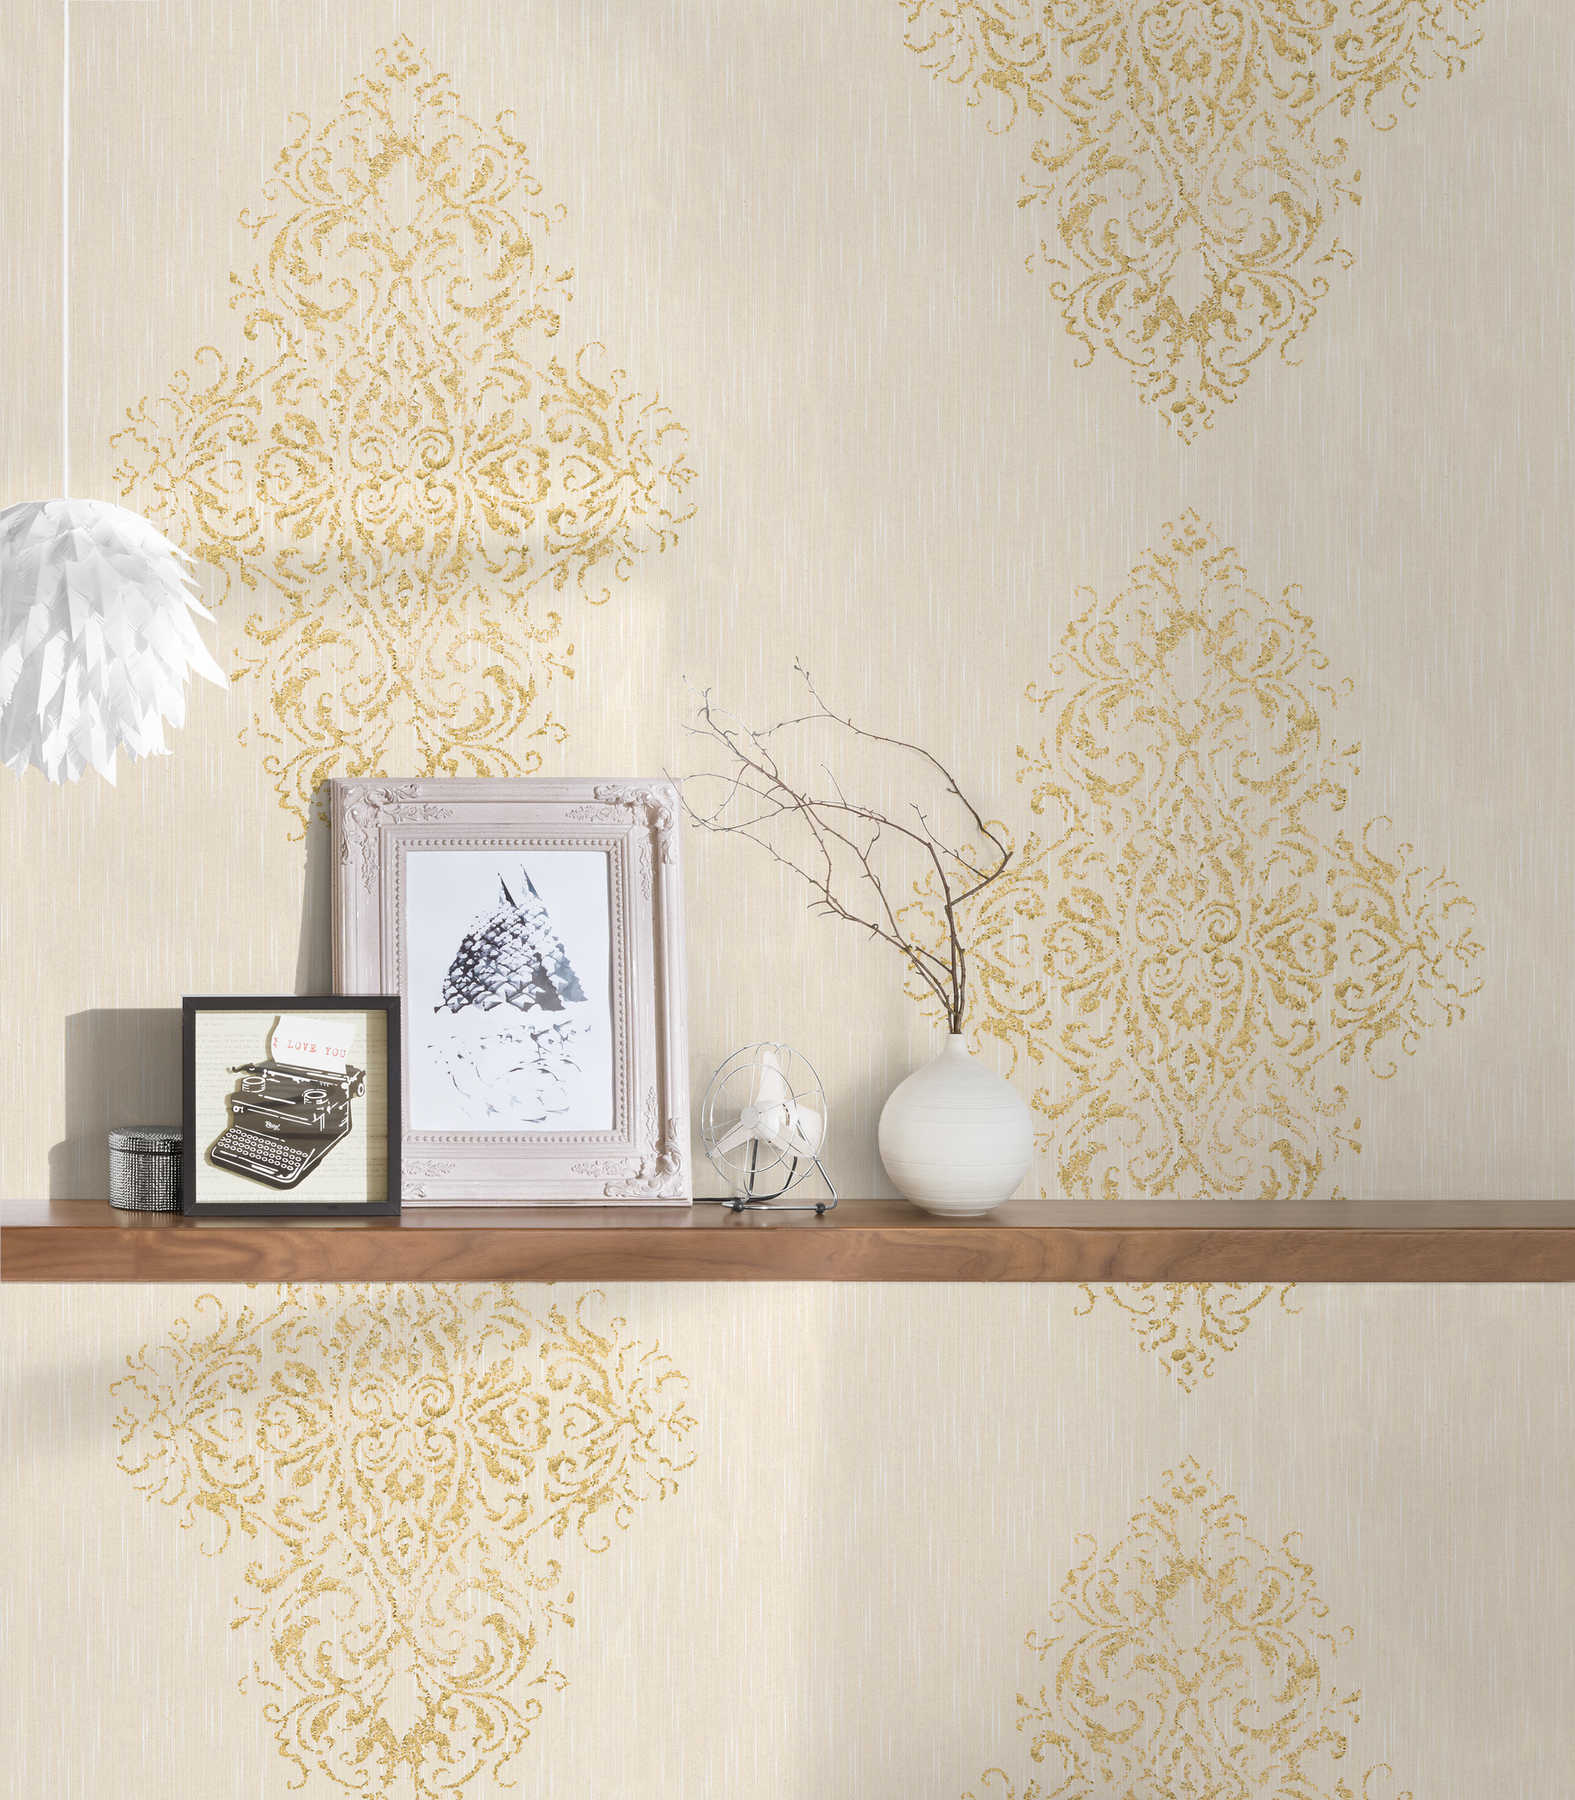             Ornament wallpaper with metallic effect in used look - cream, gold
        